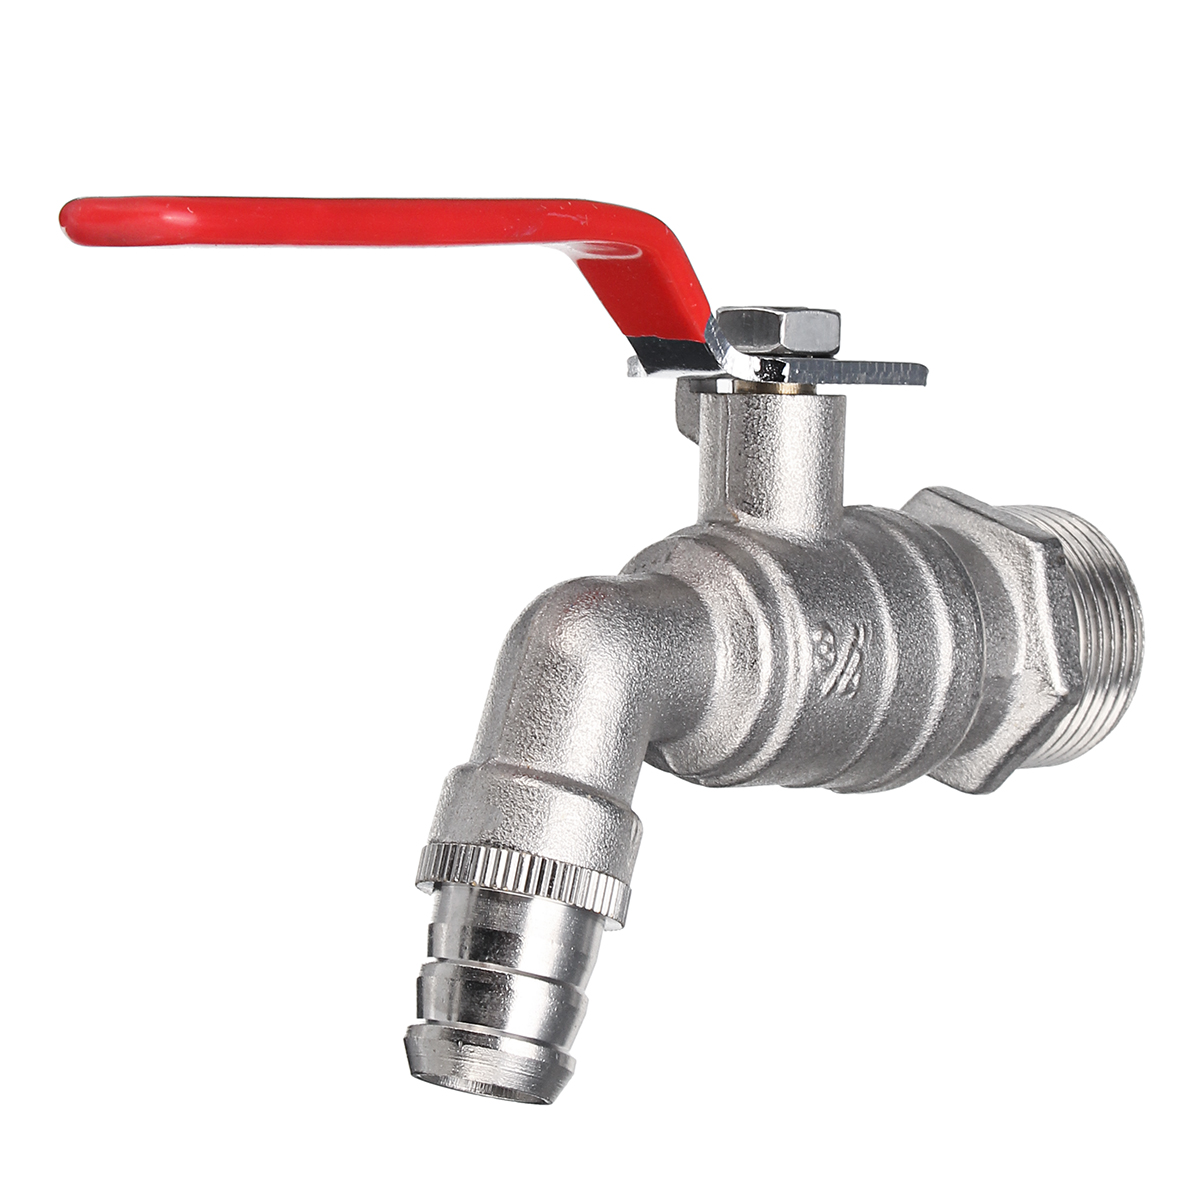 IBC-Brass-Faucet-Water-Tank-Outlet-Connector-Fitting-Adapeter-with-Range-of-Tap-Outlets-1457802